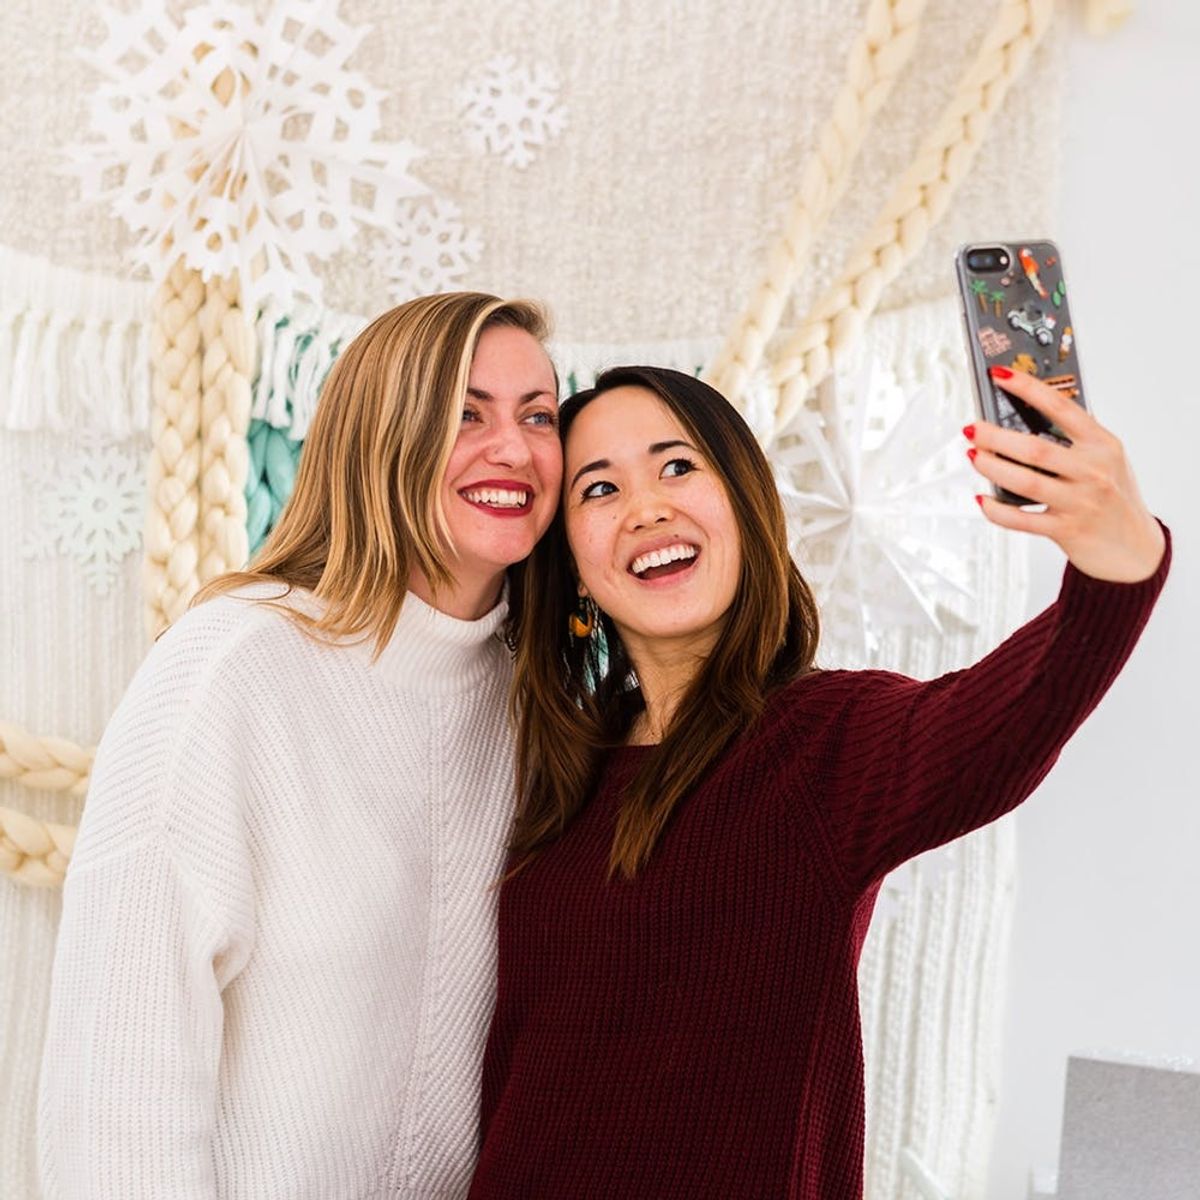 Stay Cozy This Winter With a DIY Sweater Photo Booth